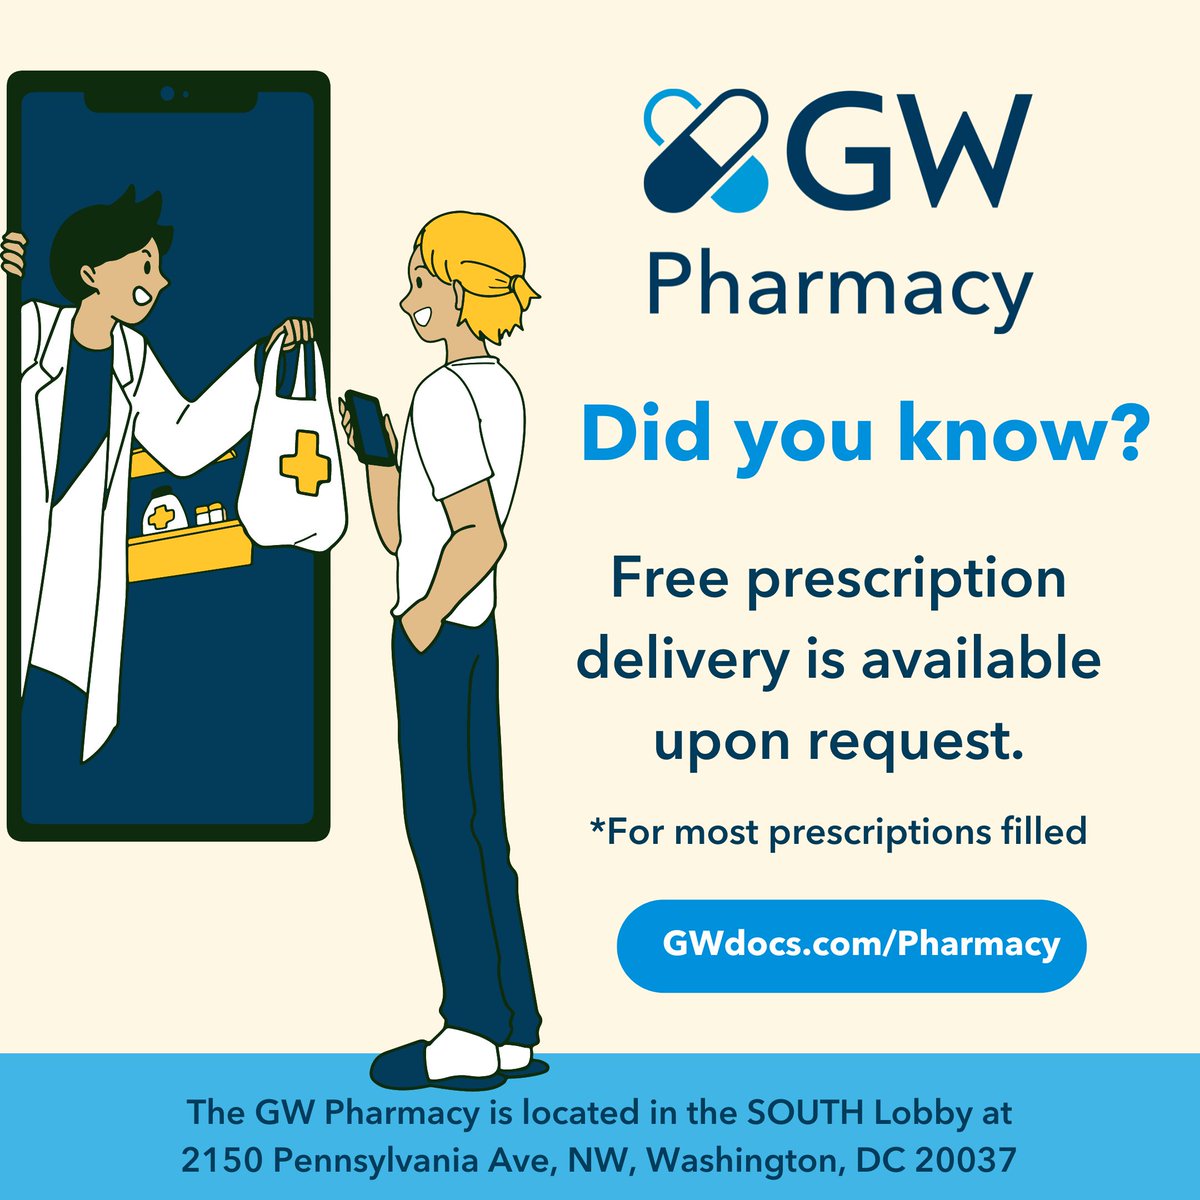 Visit us at the GW MFA pharmacy located in Foggy Bottom! For more information please visit gwdocs.com/pharmacy. *Free delivery is offered inside the beltway; outside the beltway, a small fee may apply.